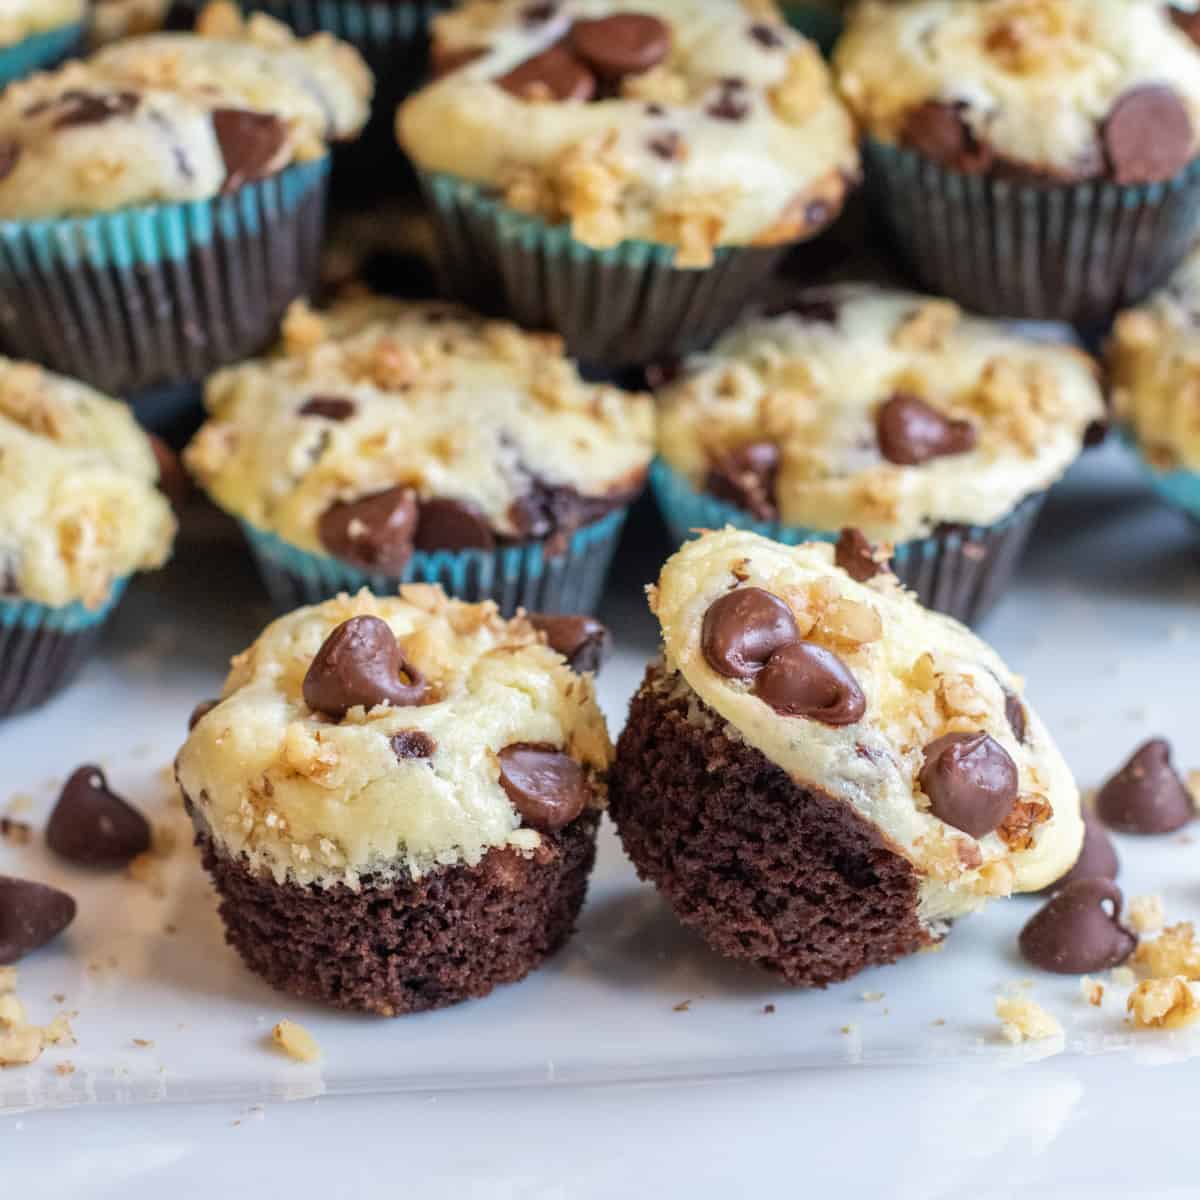 mini chocolate cupcakes with cream cheese topping and chocolate chips and walnuts on top.